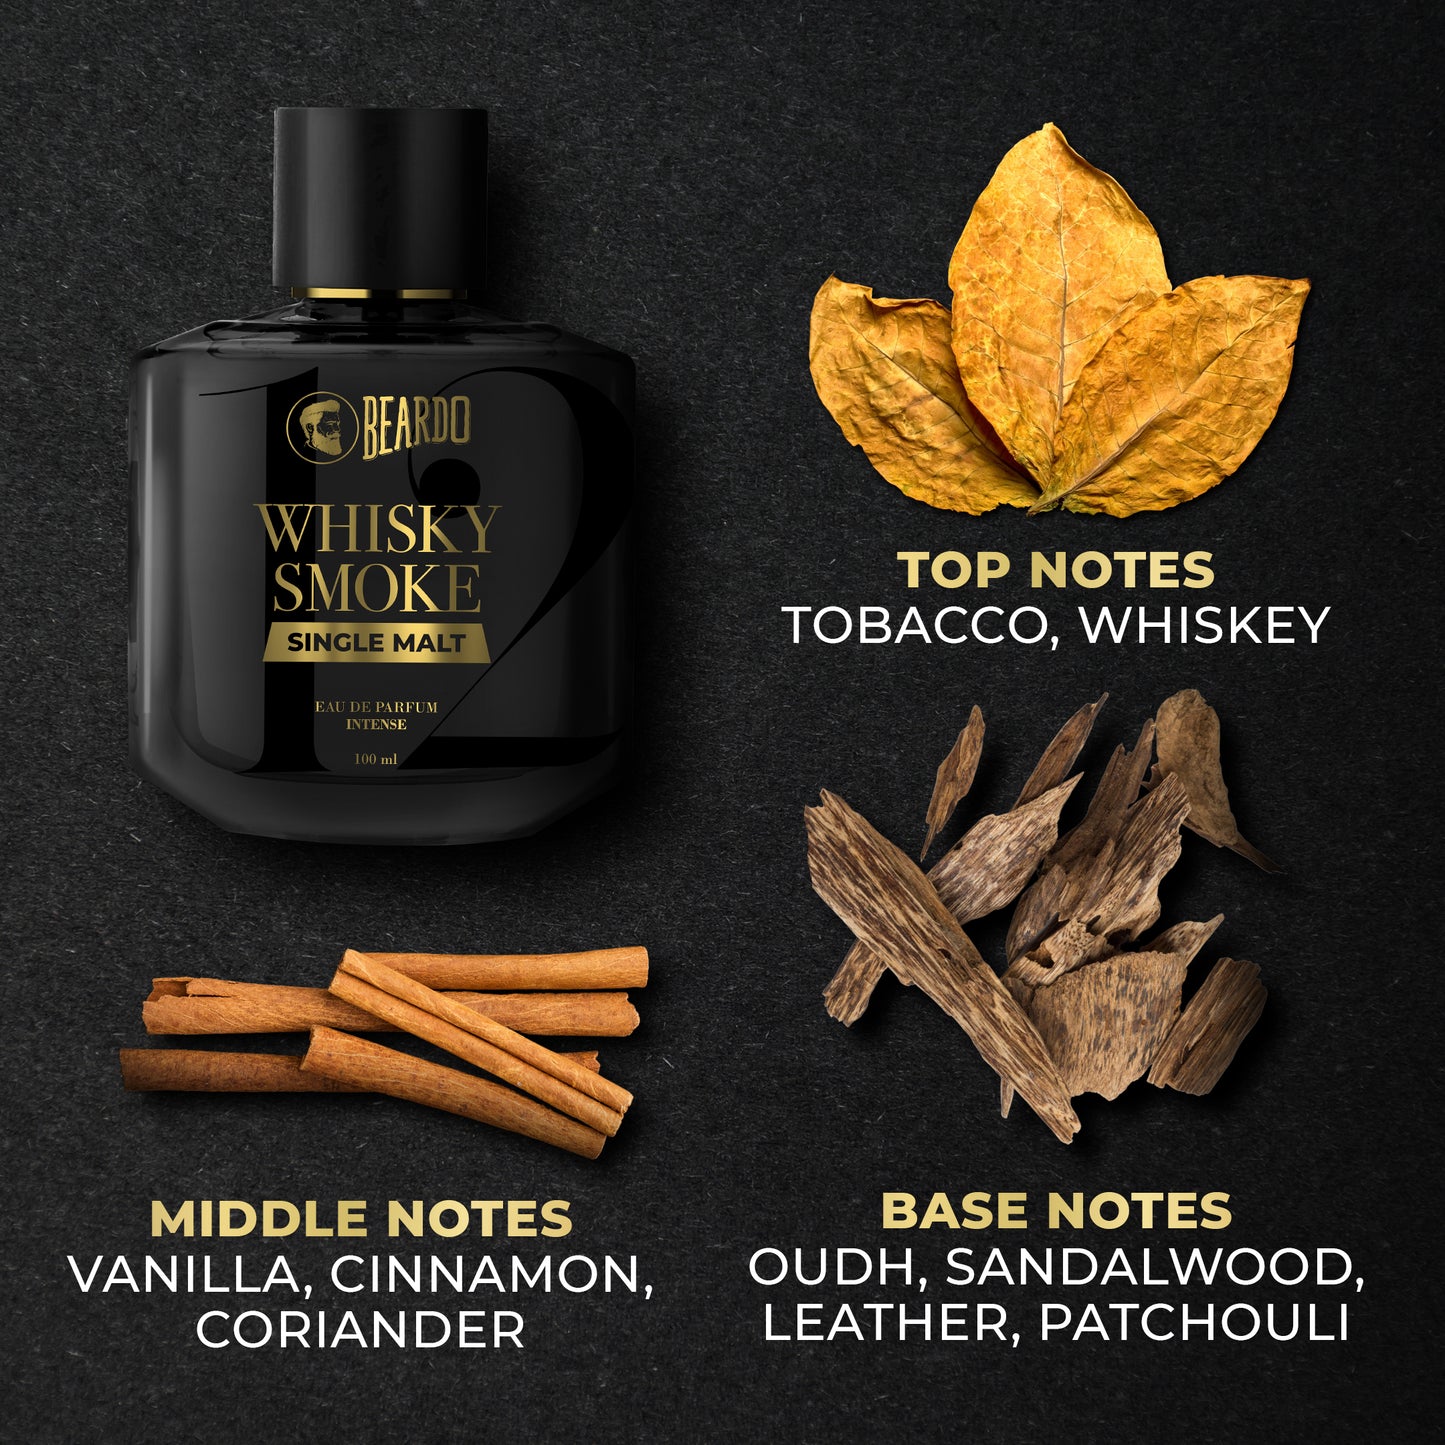 whiskey notes, oudh, cinnamon notes